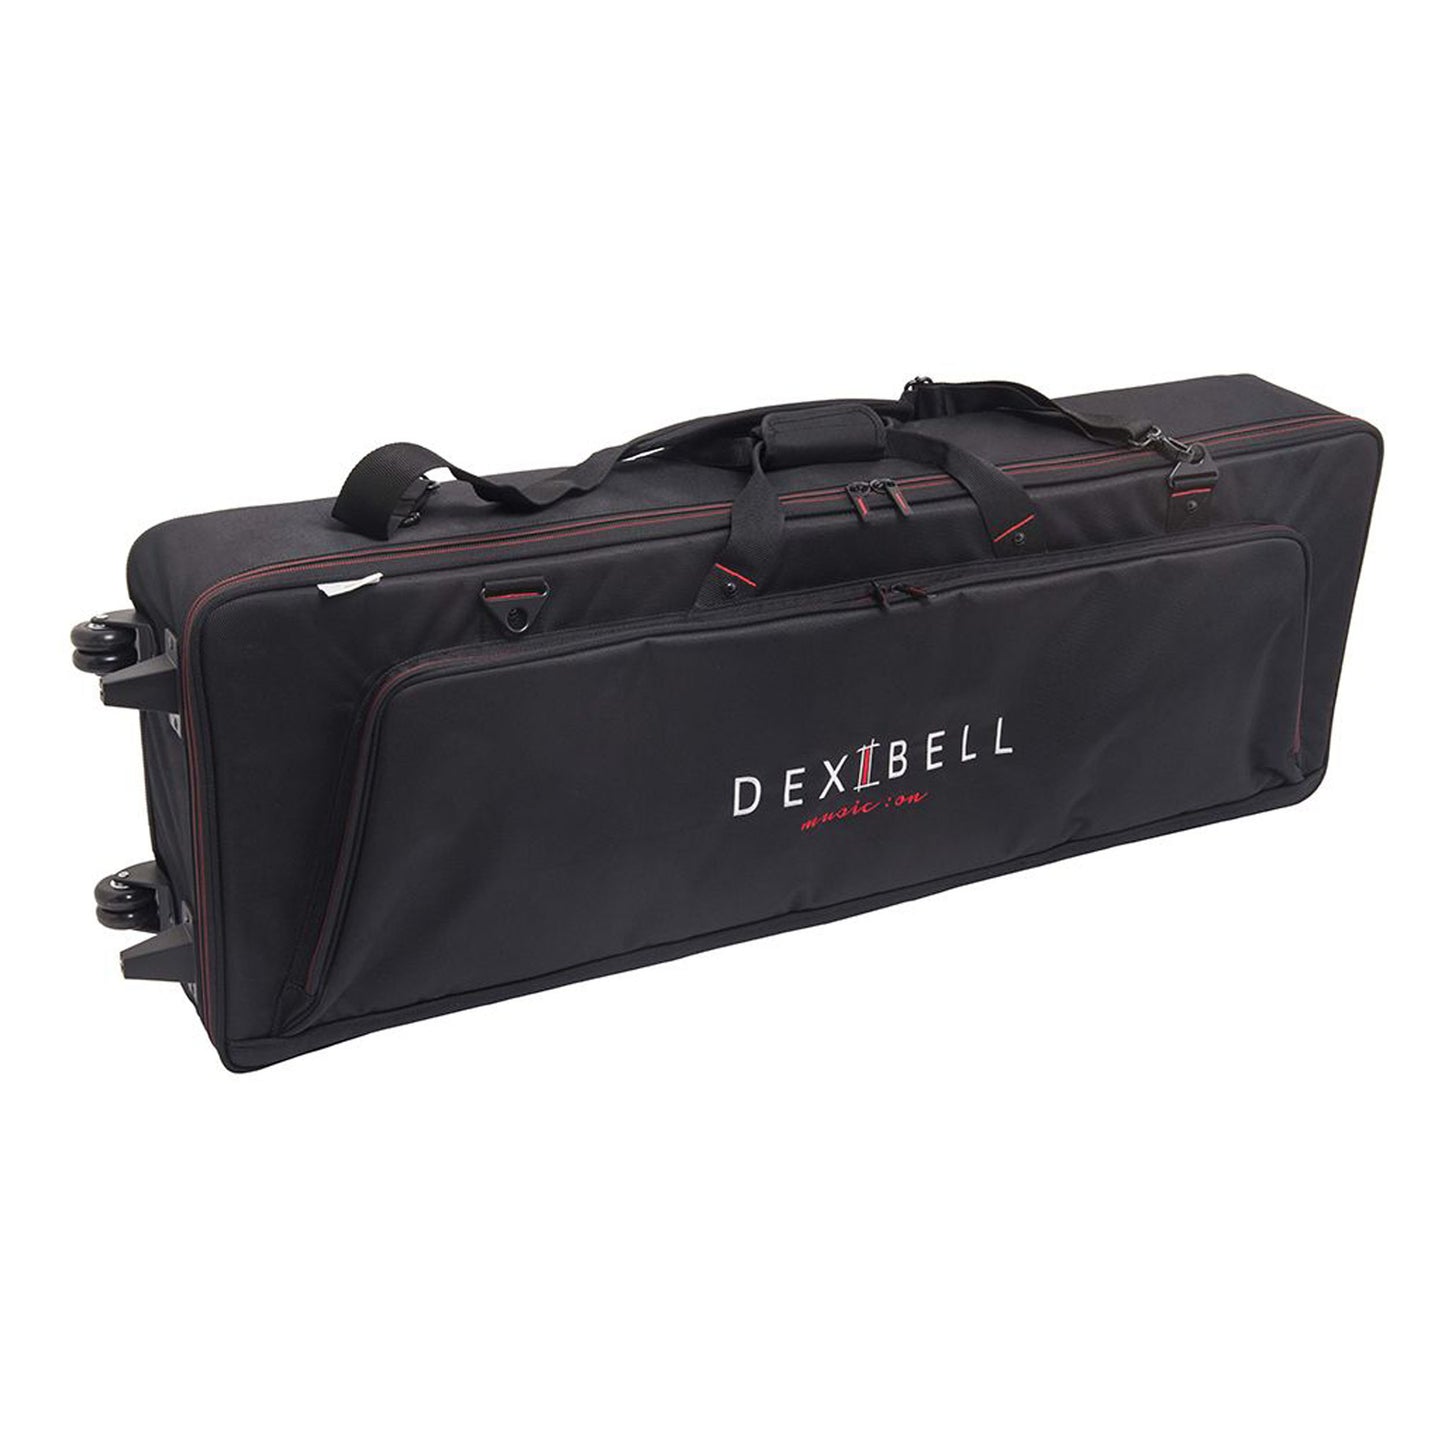 Dexibell DXBAGL3J7 Padded Bag With Wheels For Classico L3 And Combo J7 Organs